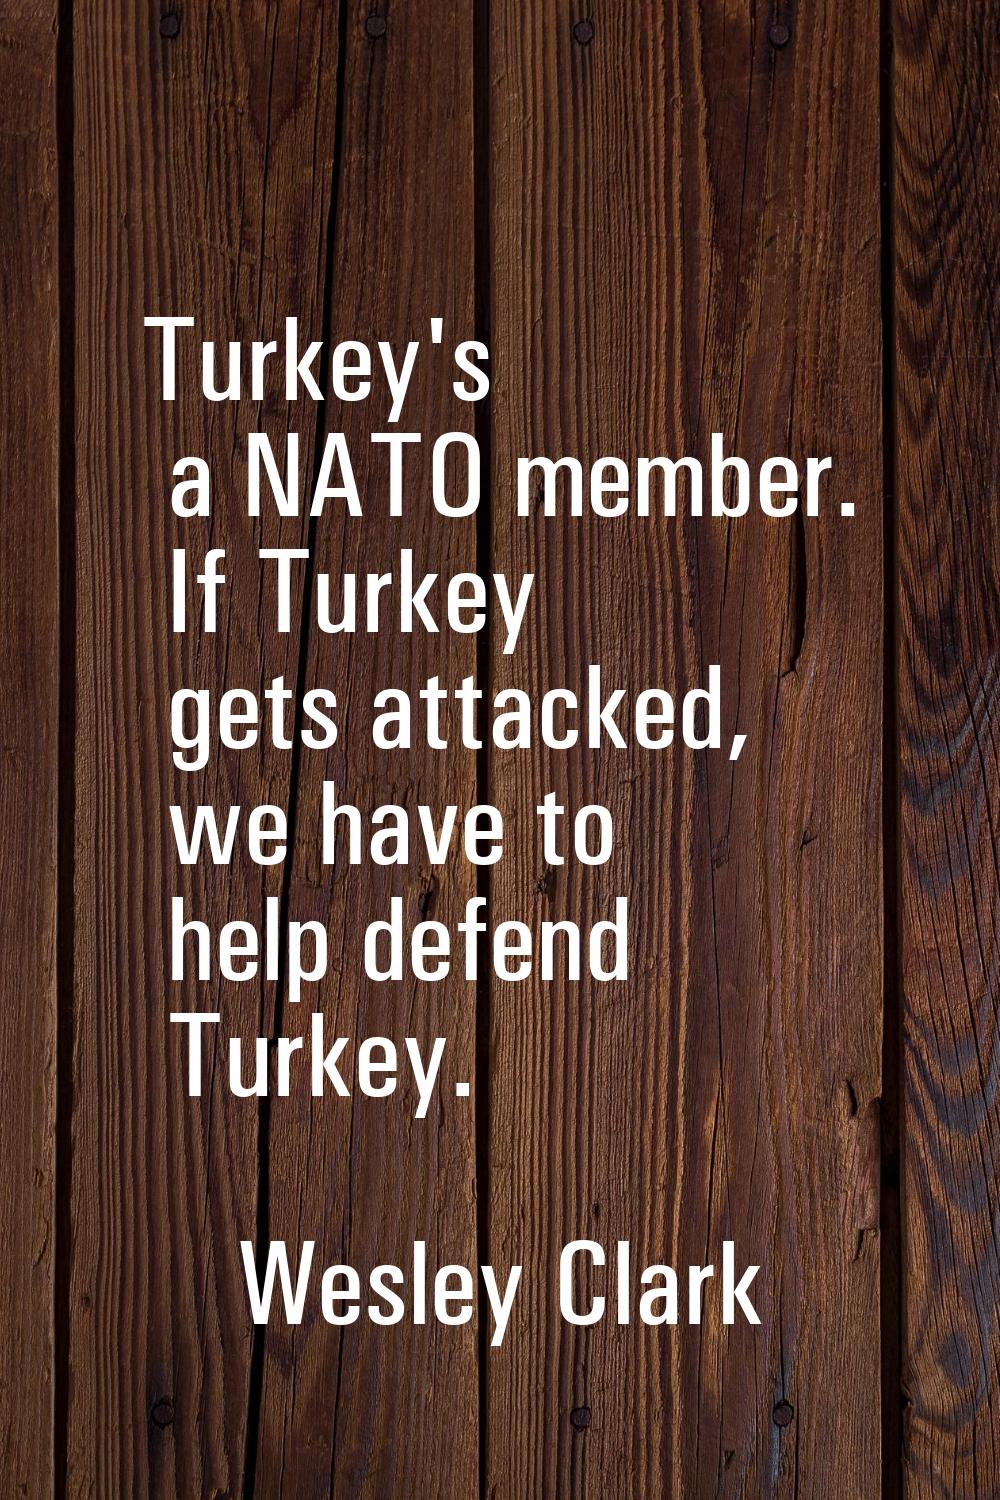 Turkey's a NATO member. If Turkey gets attacked, we have to help defend Turkey.